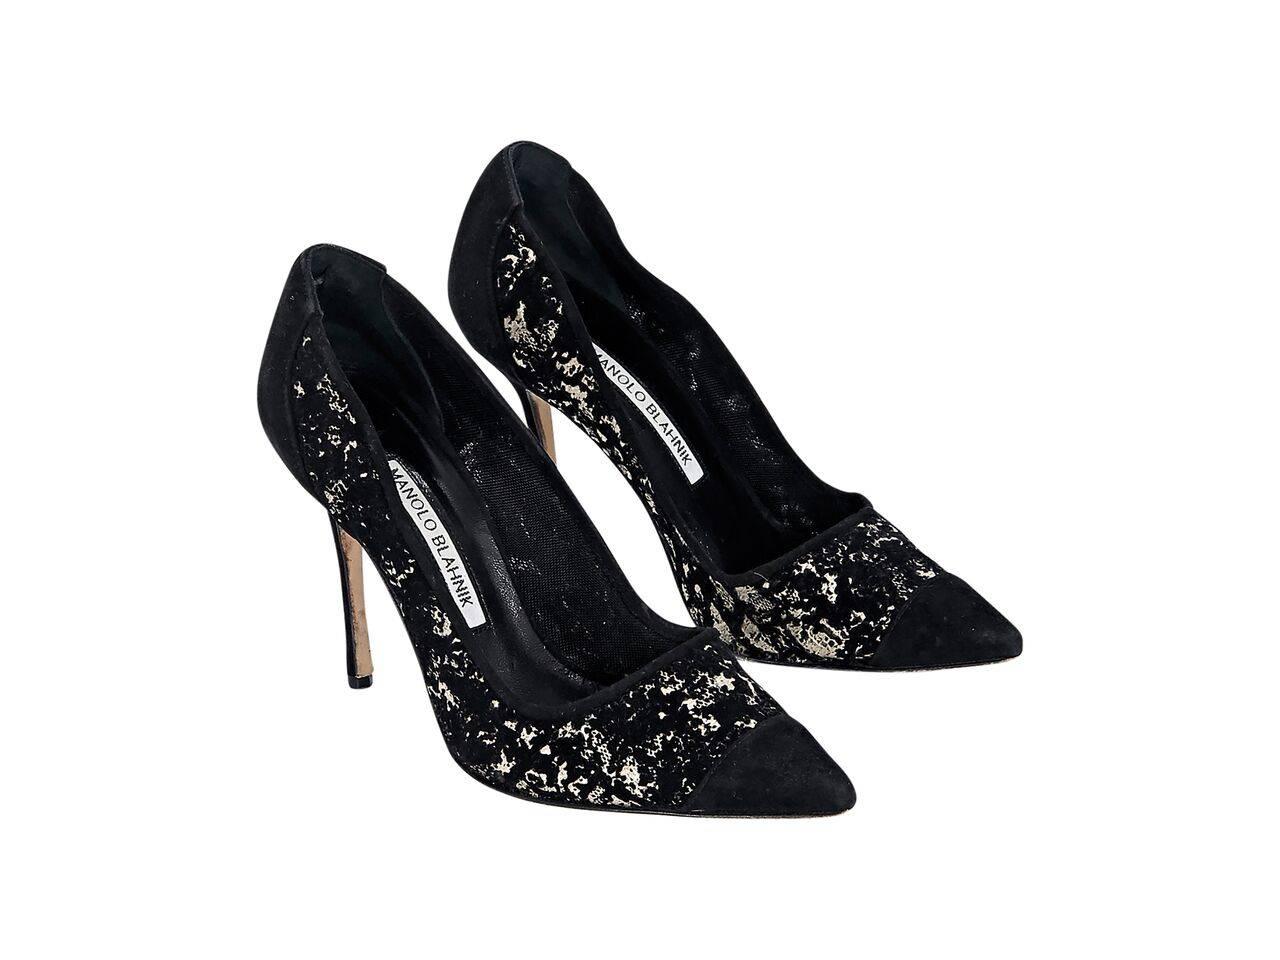 Product details:  Black and white printed suede pumps by Manolo Blahnik.  Point toe.  Slip-on style. 
Condition: Pre-owned. Very good.
Est. Retail $ 698.00